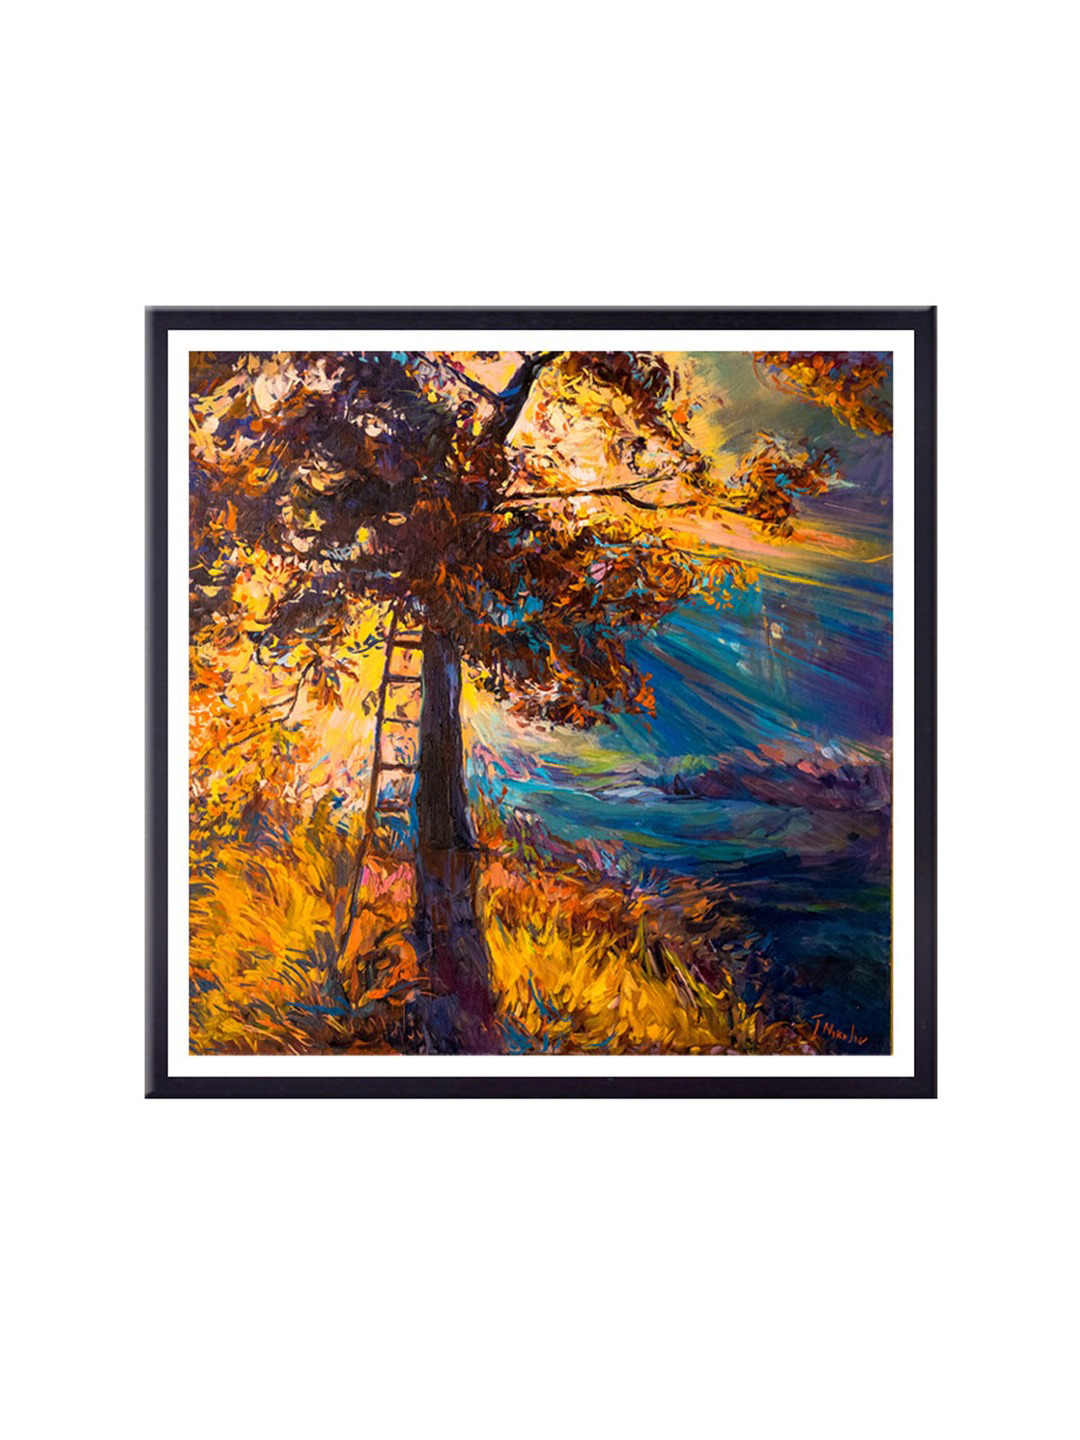 Blue & Yellow Leaves Tree Printed Canvas Wall Art